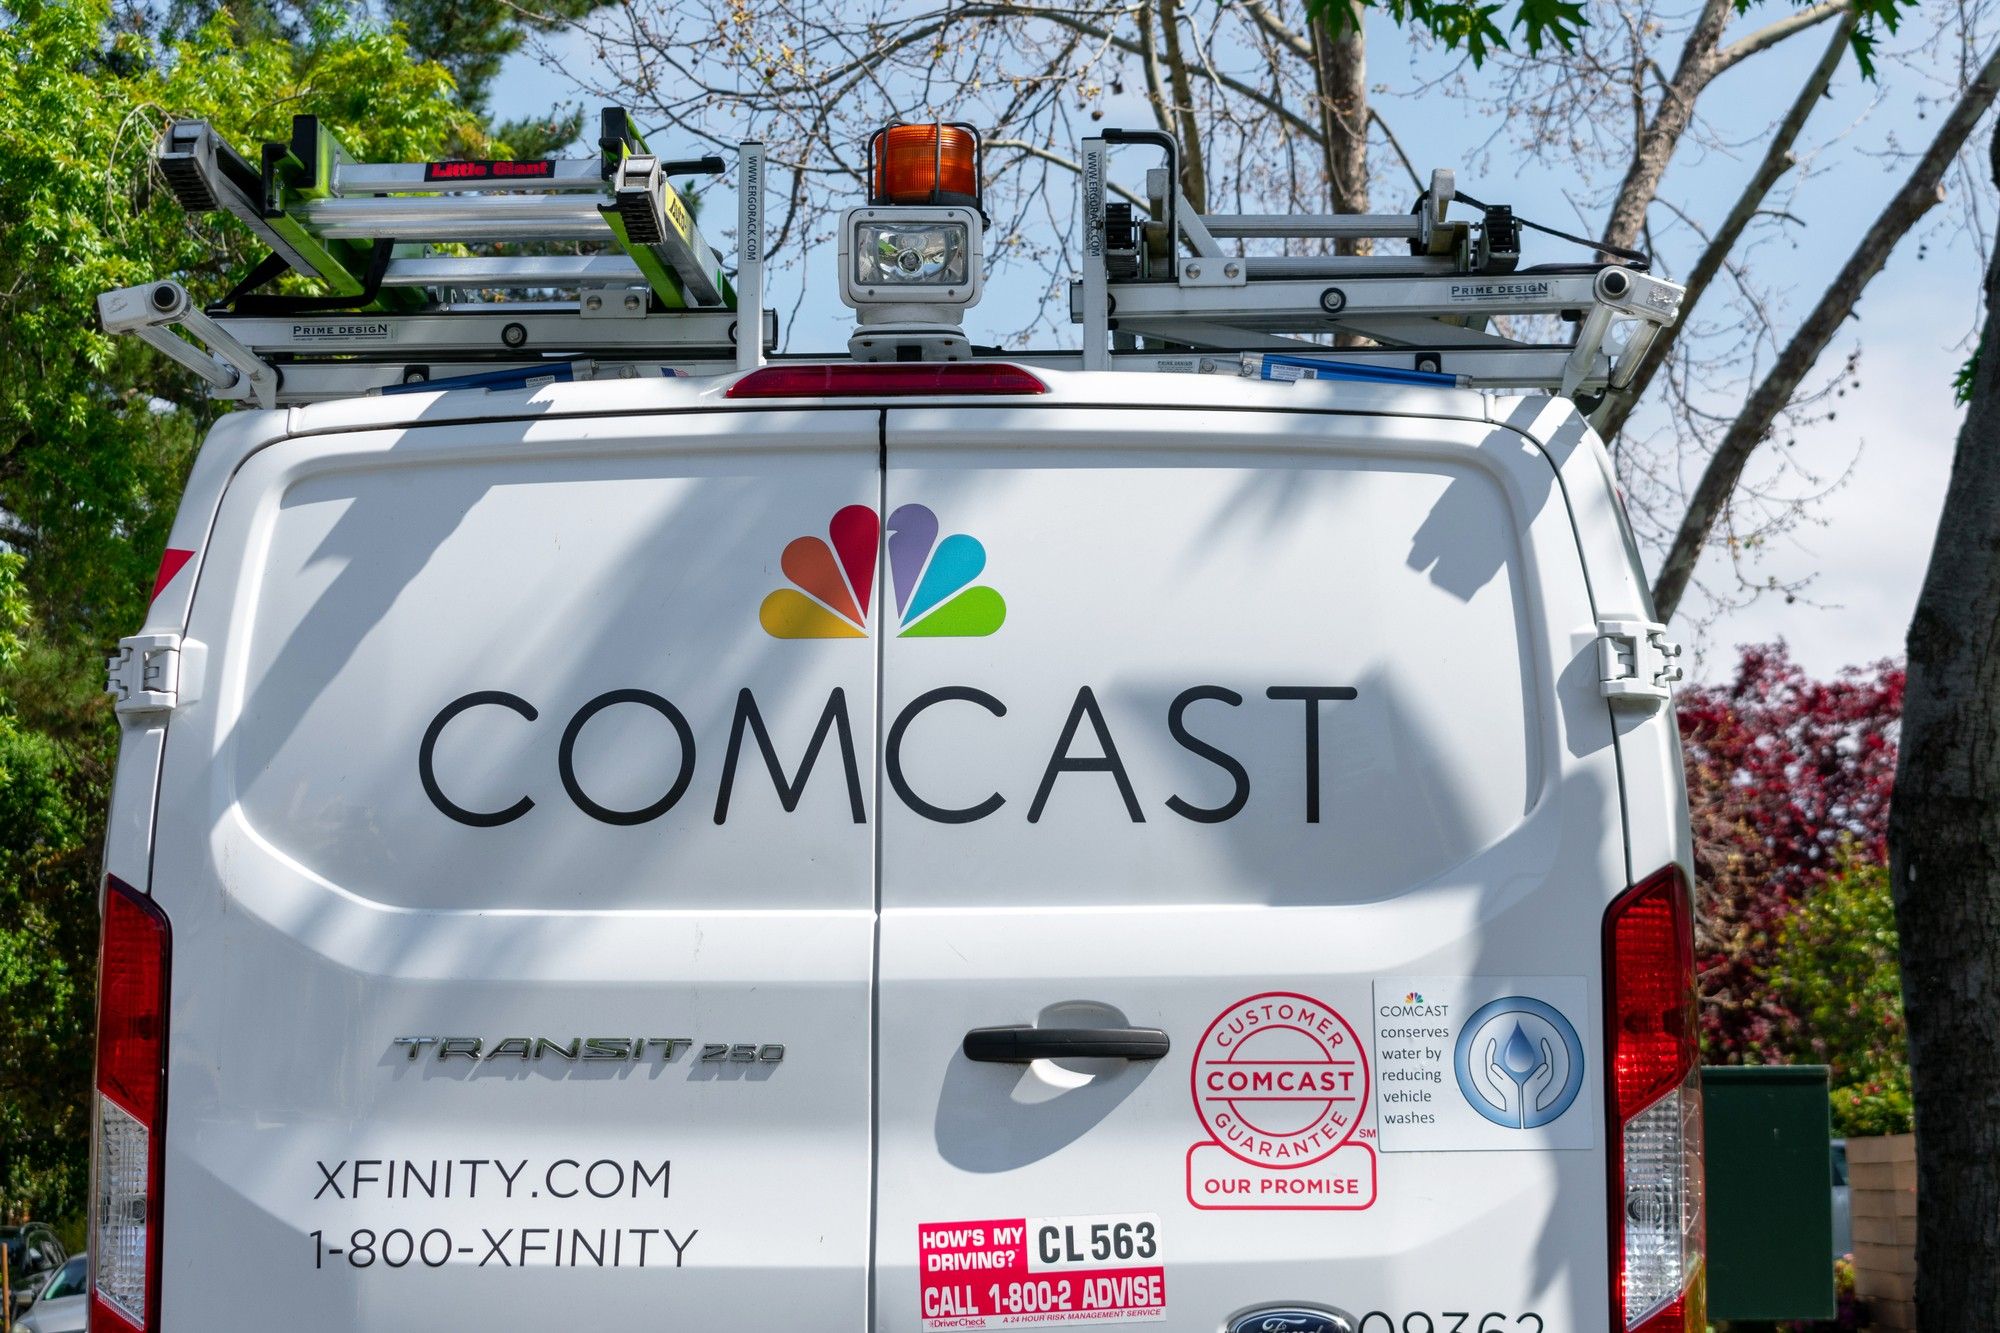 Comcast insurance should cover outdoor therapy claims class action lawsuit.